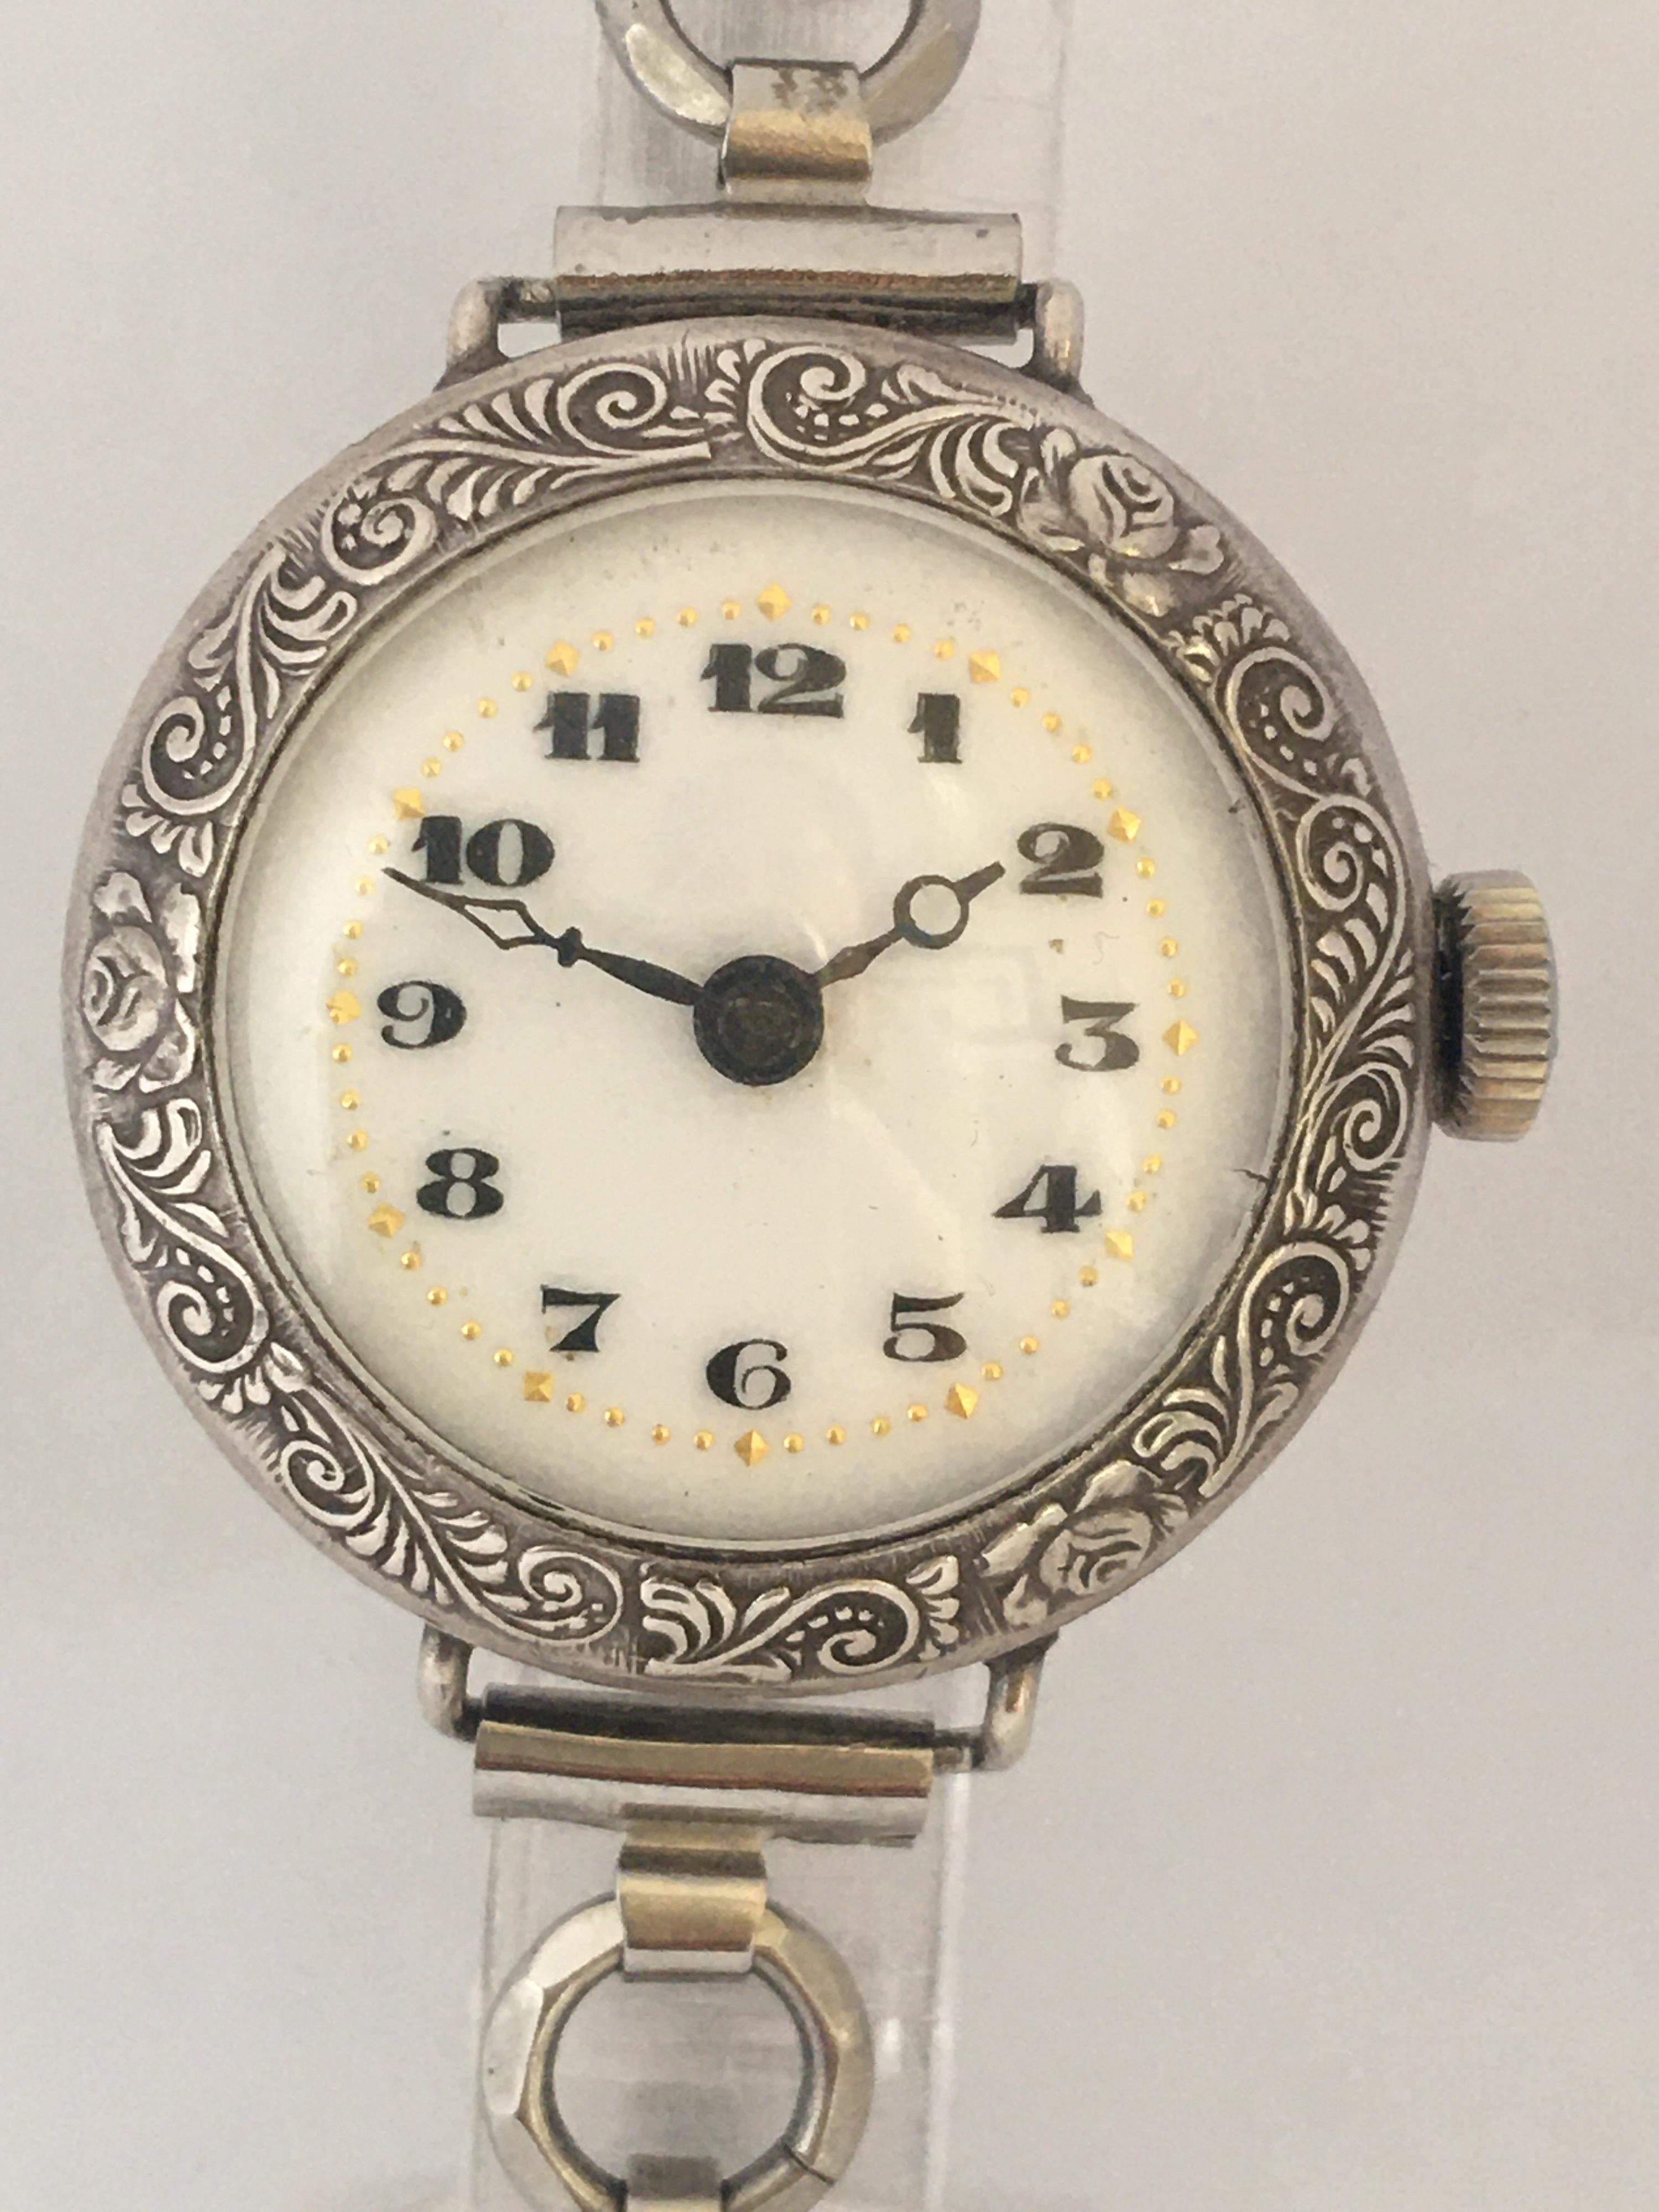 This beautiful pre-owner 26mm diameter silver hand-winding trench watch is in good working condition and it is ticking well. It is recently been serviced. Visible signs of ageing and wear with light and tiny scratches on the watch case. There’s is a